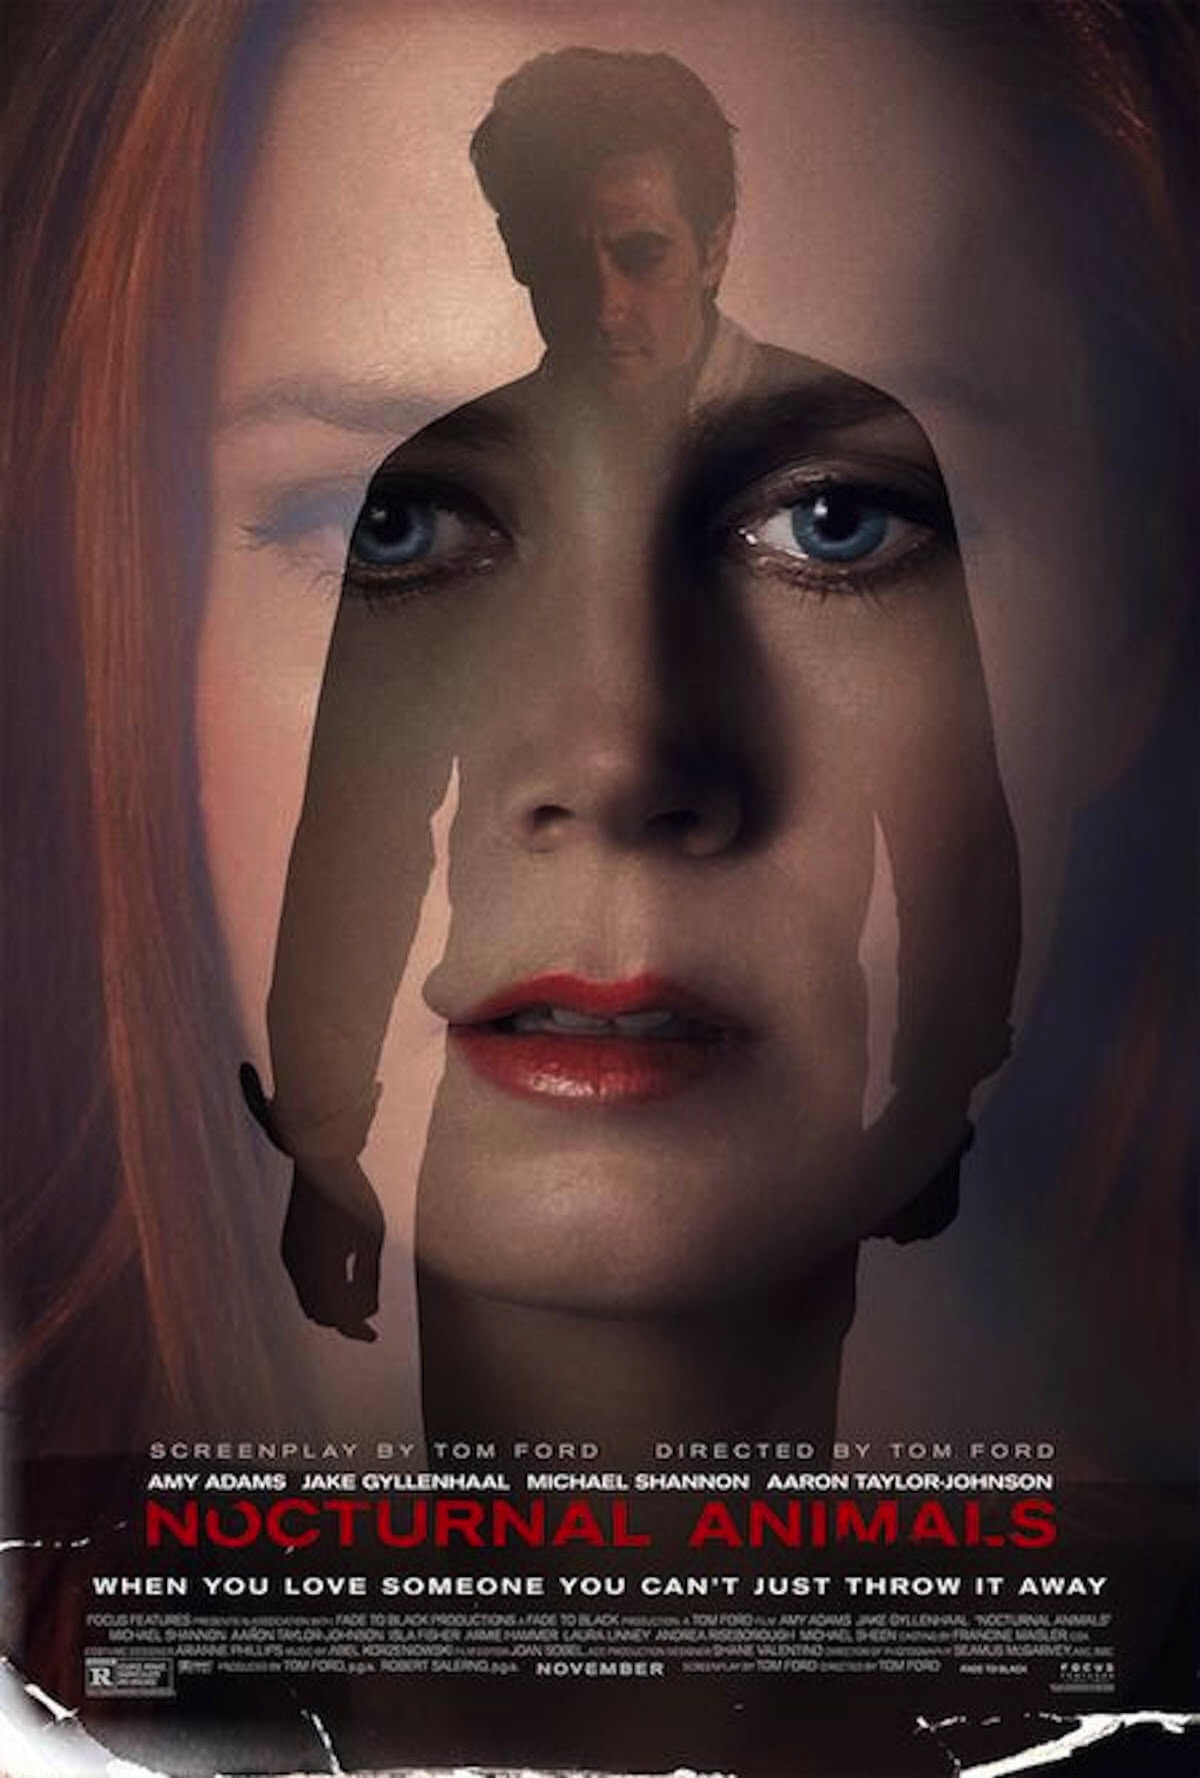 Nocturnal animals poster